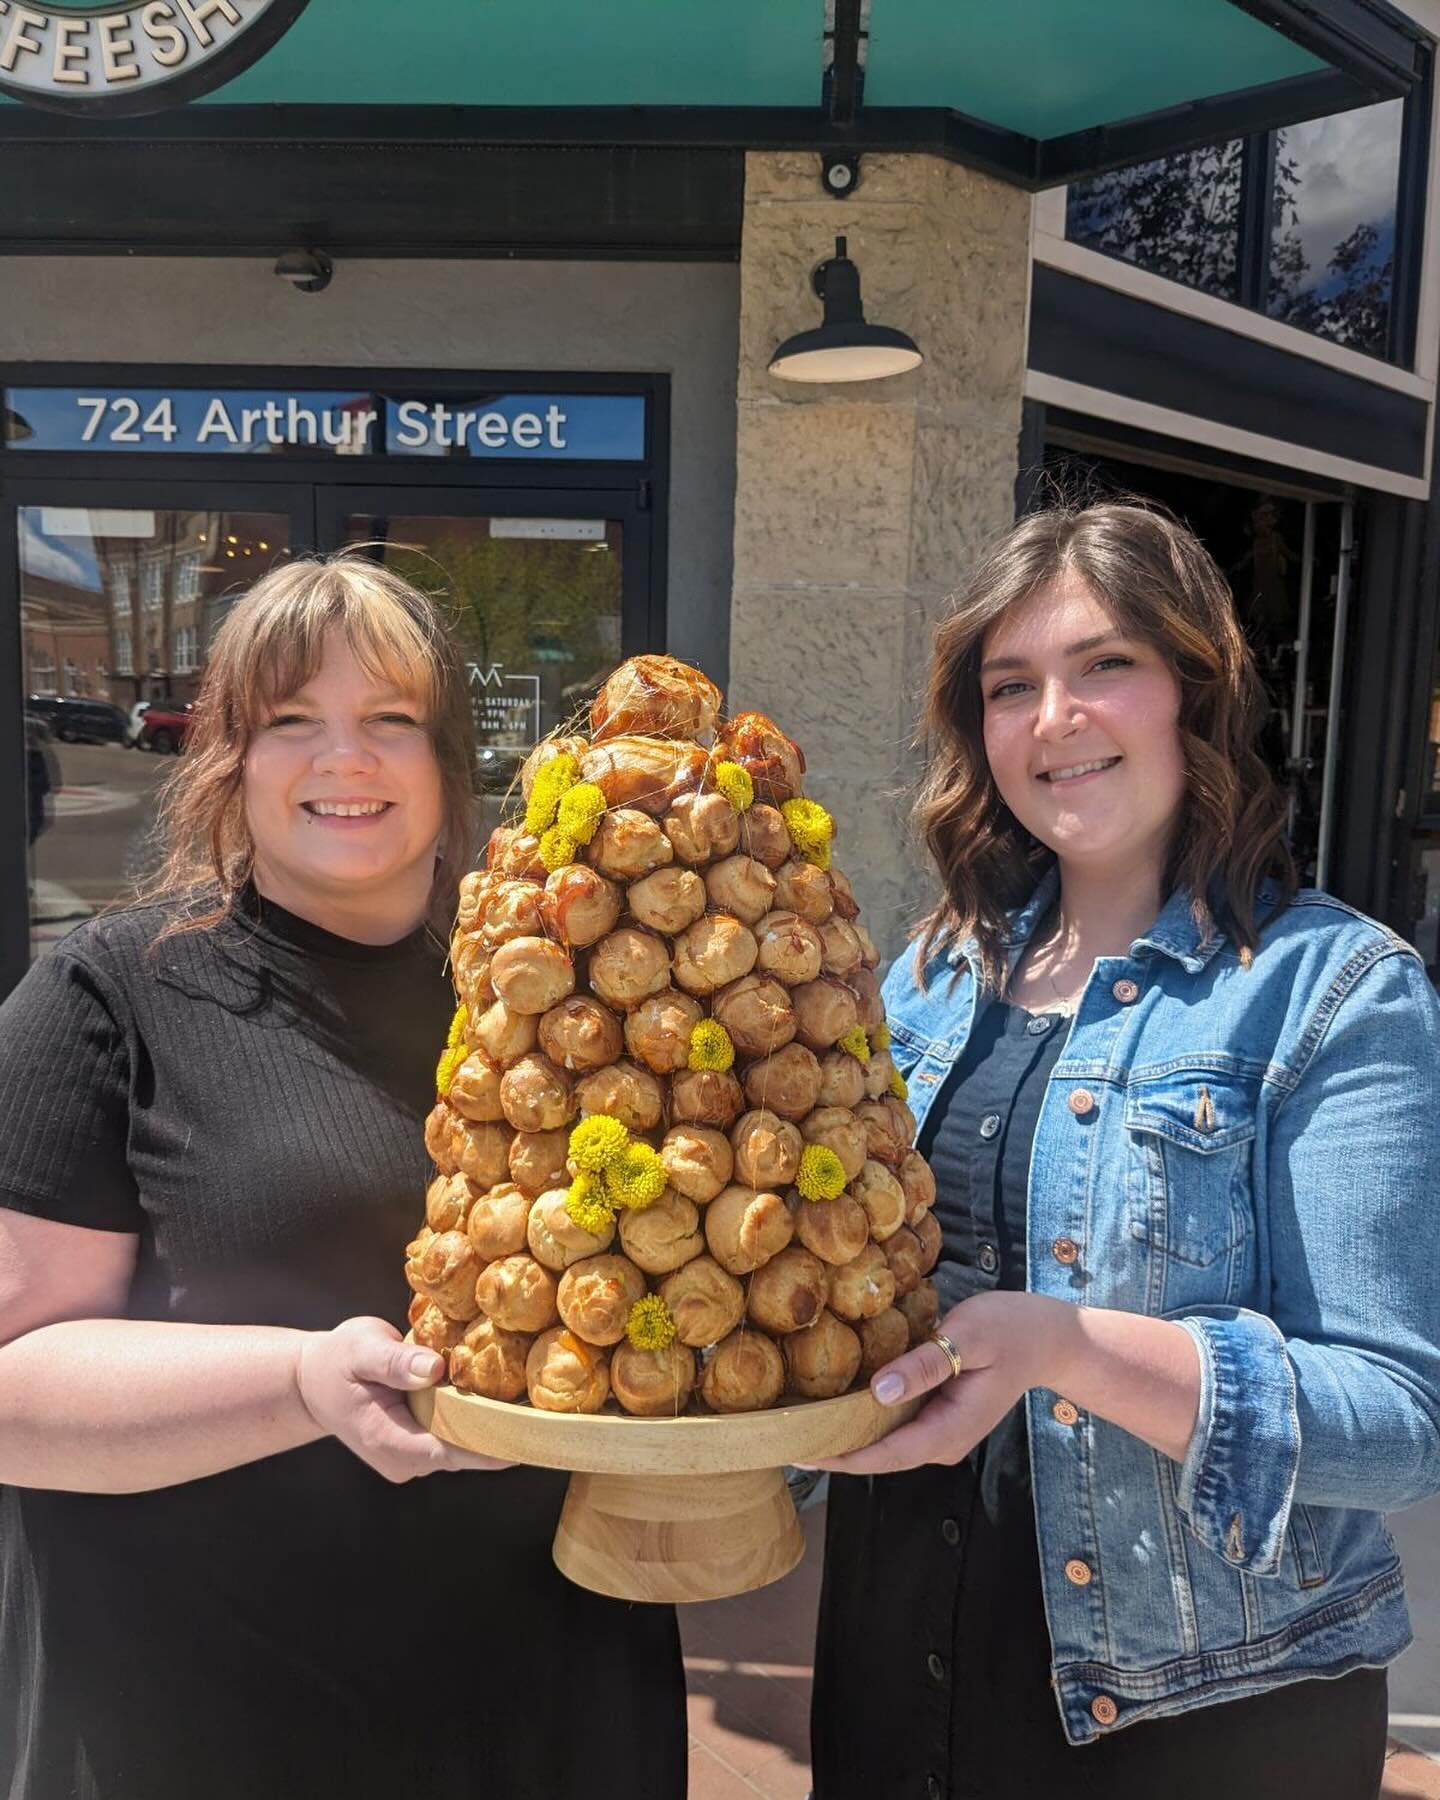 Just want to give a shout out to Becky &amp; Kasey, our incredible bakers, for making this insane cream puff mountain for the @canyoncountysymphony gala tonight!!! Made from scratch with a lot of love as always.❤️